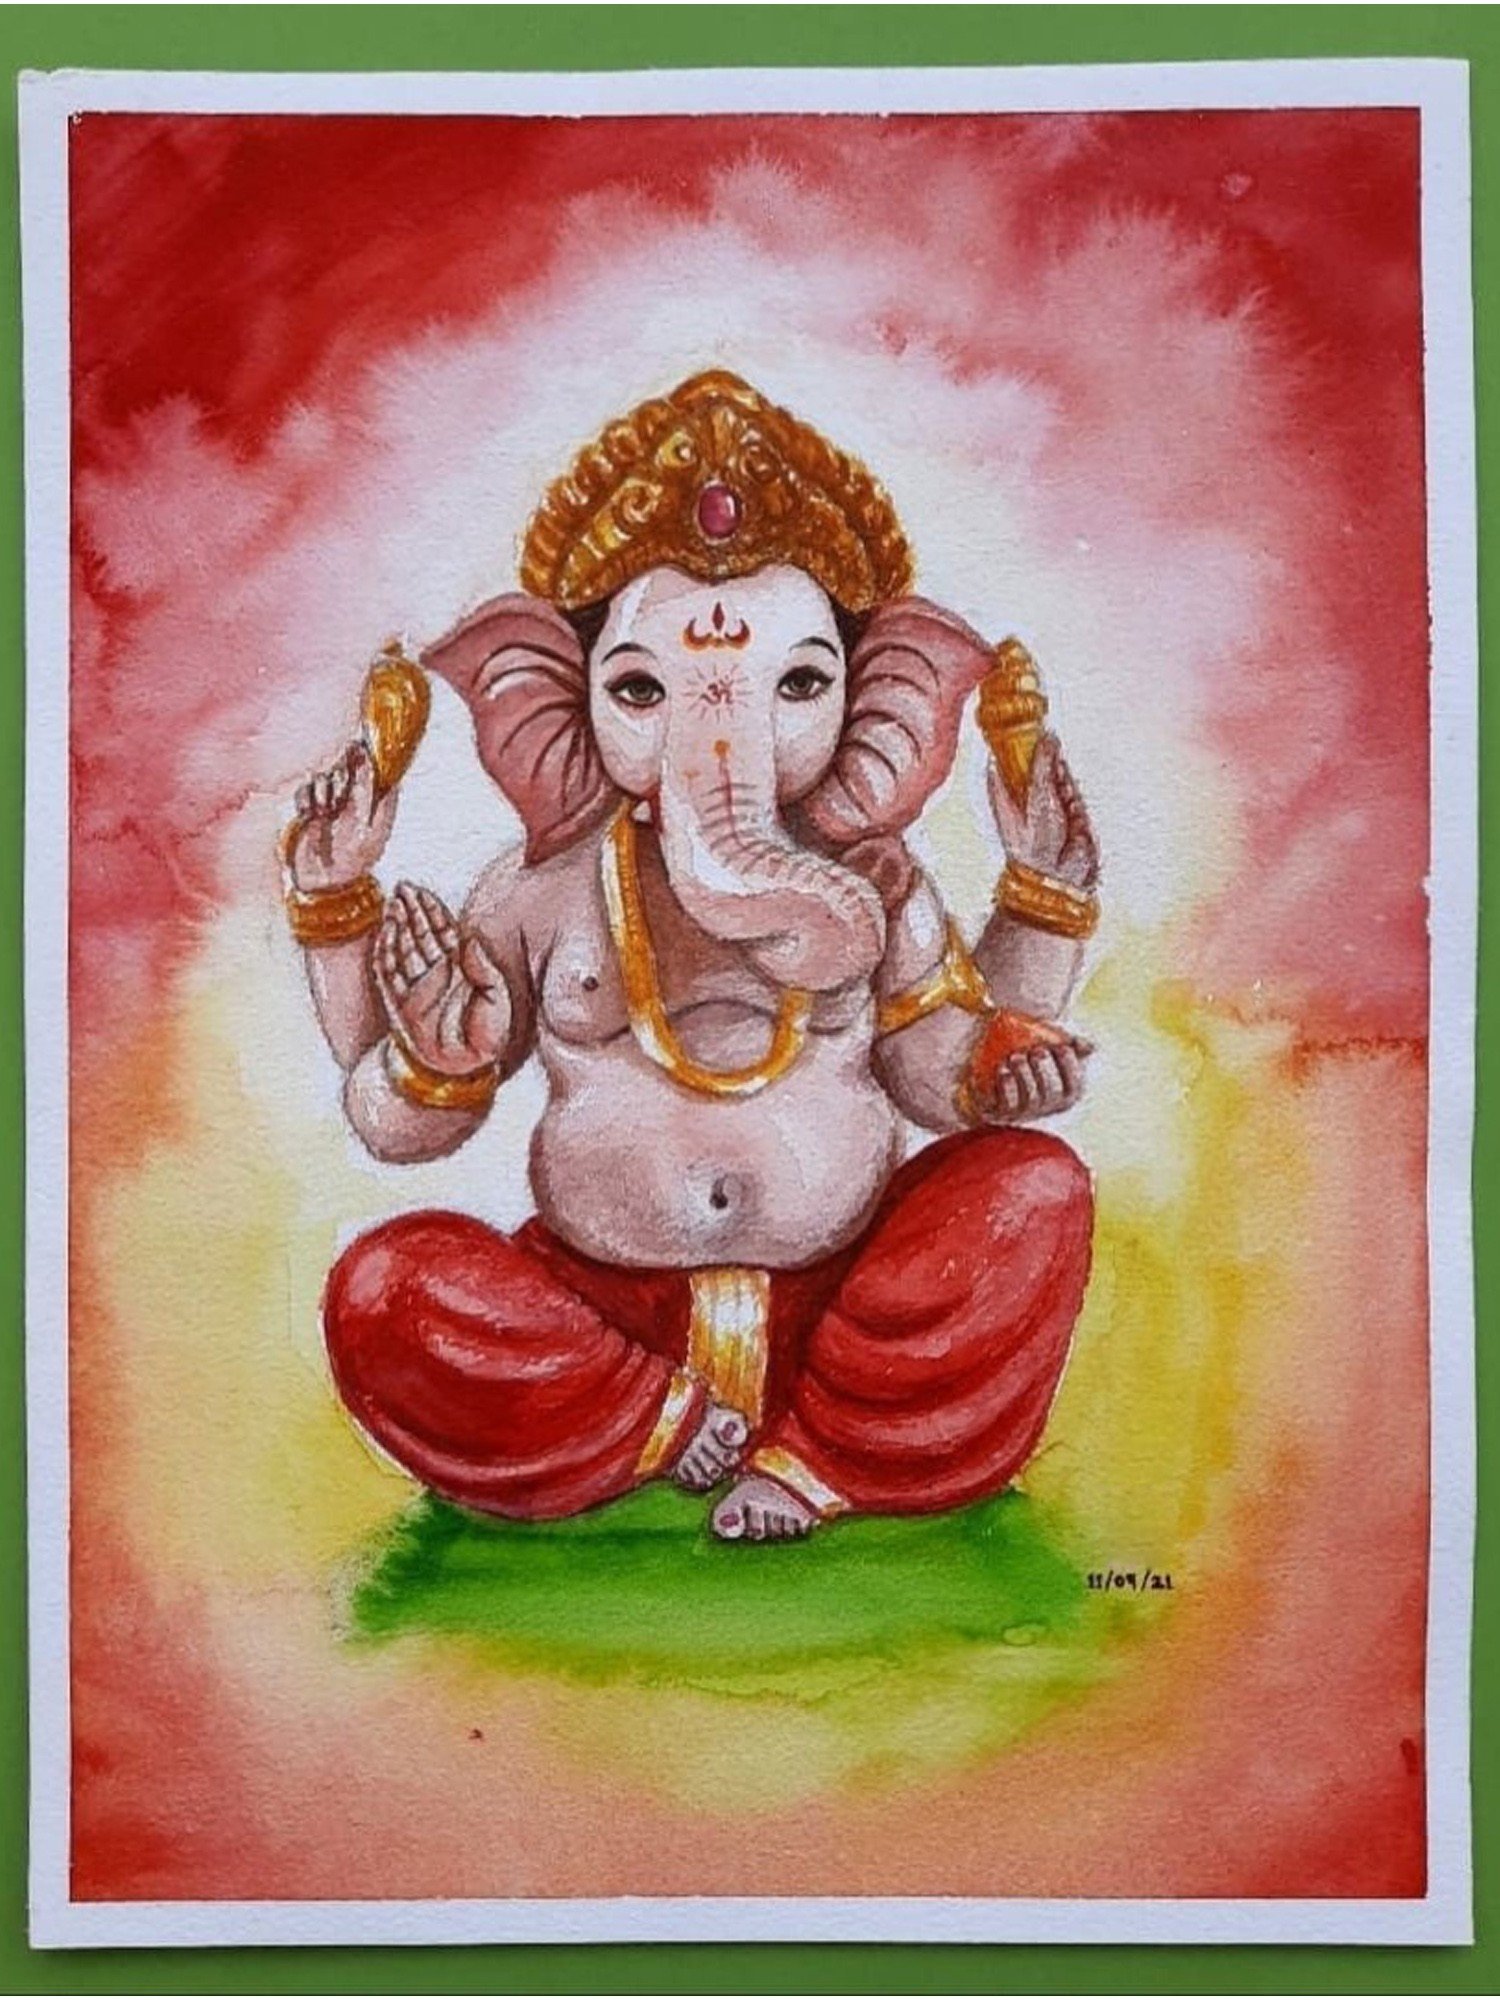 Buy Cute Ganesha Painting 3045 Drawing Online at Best Prices by Top World  Artist.